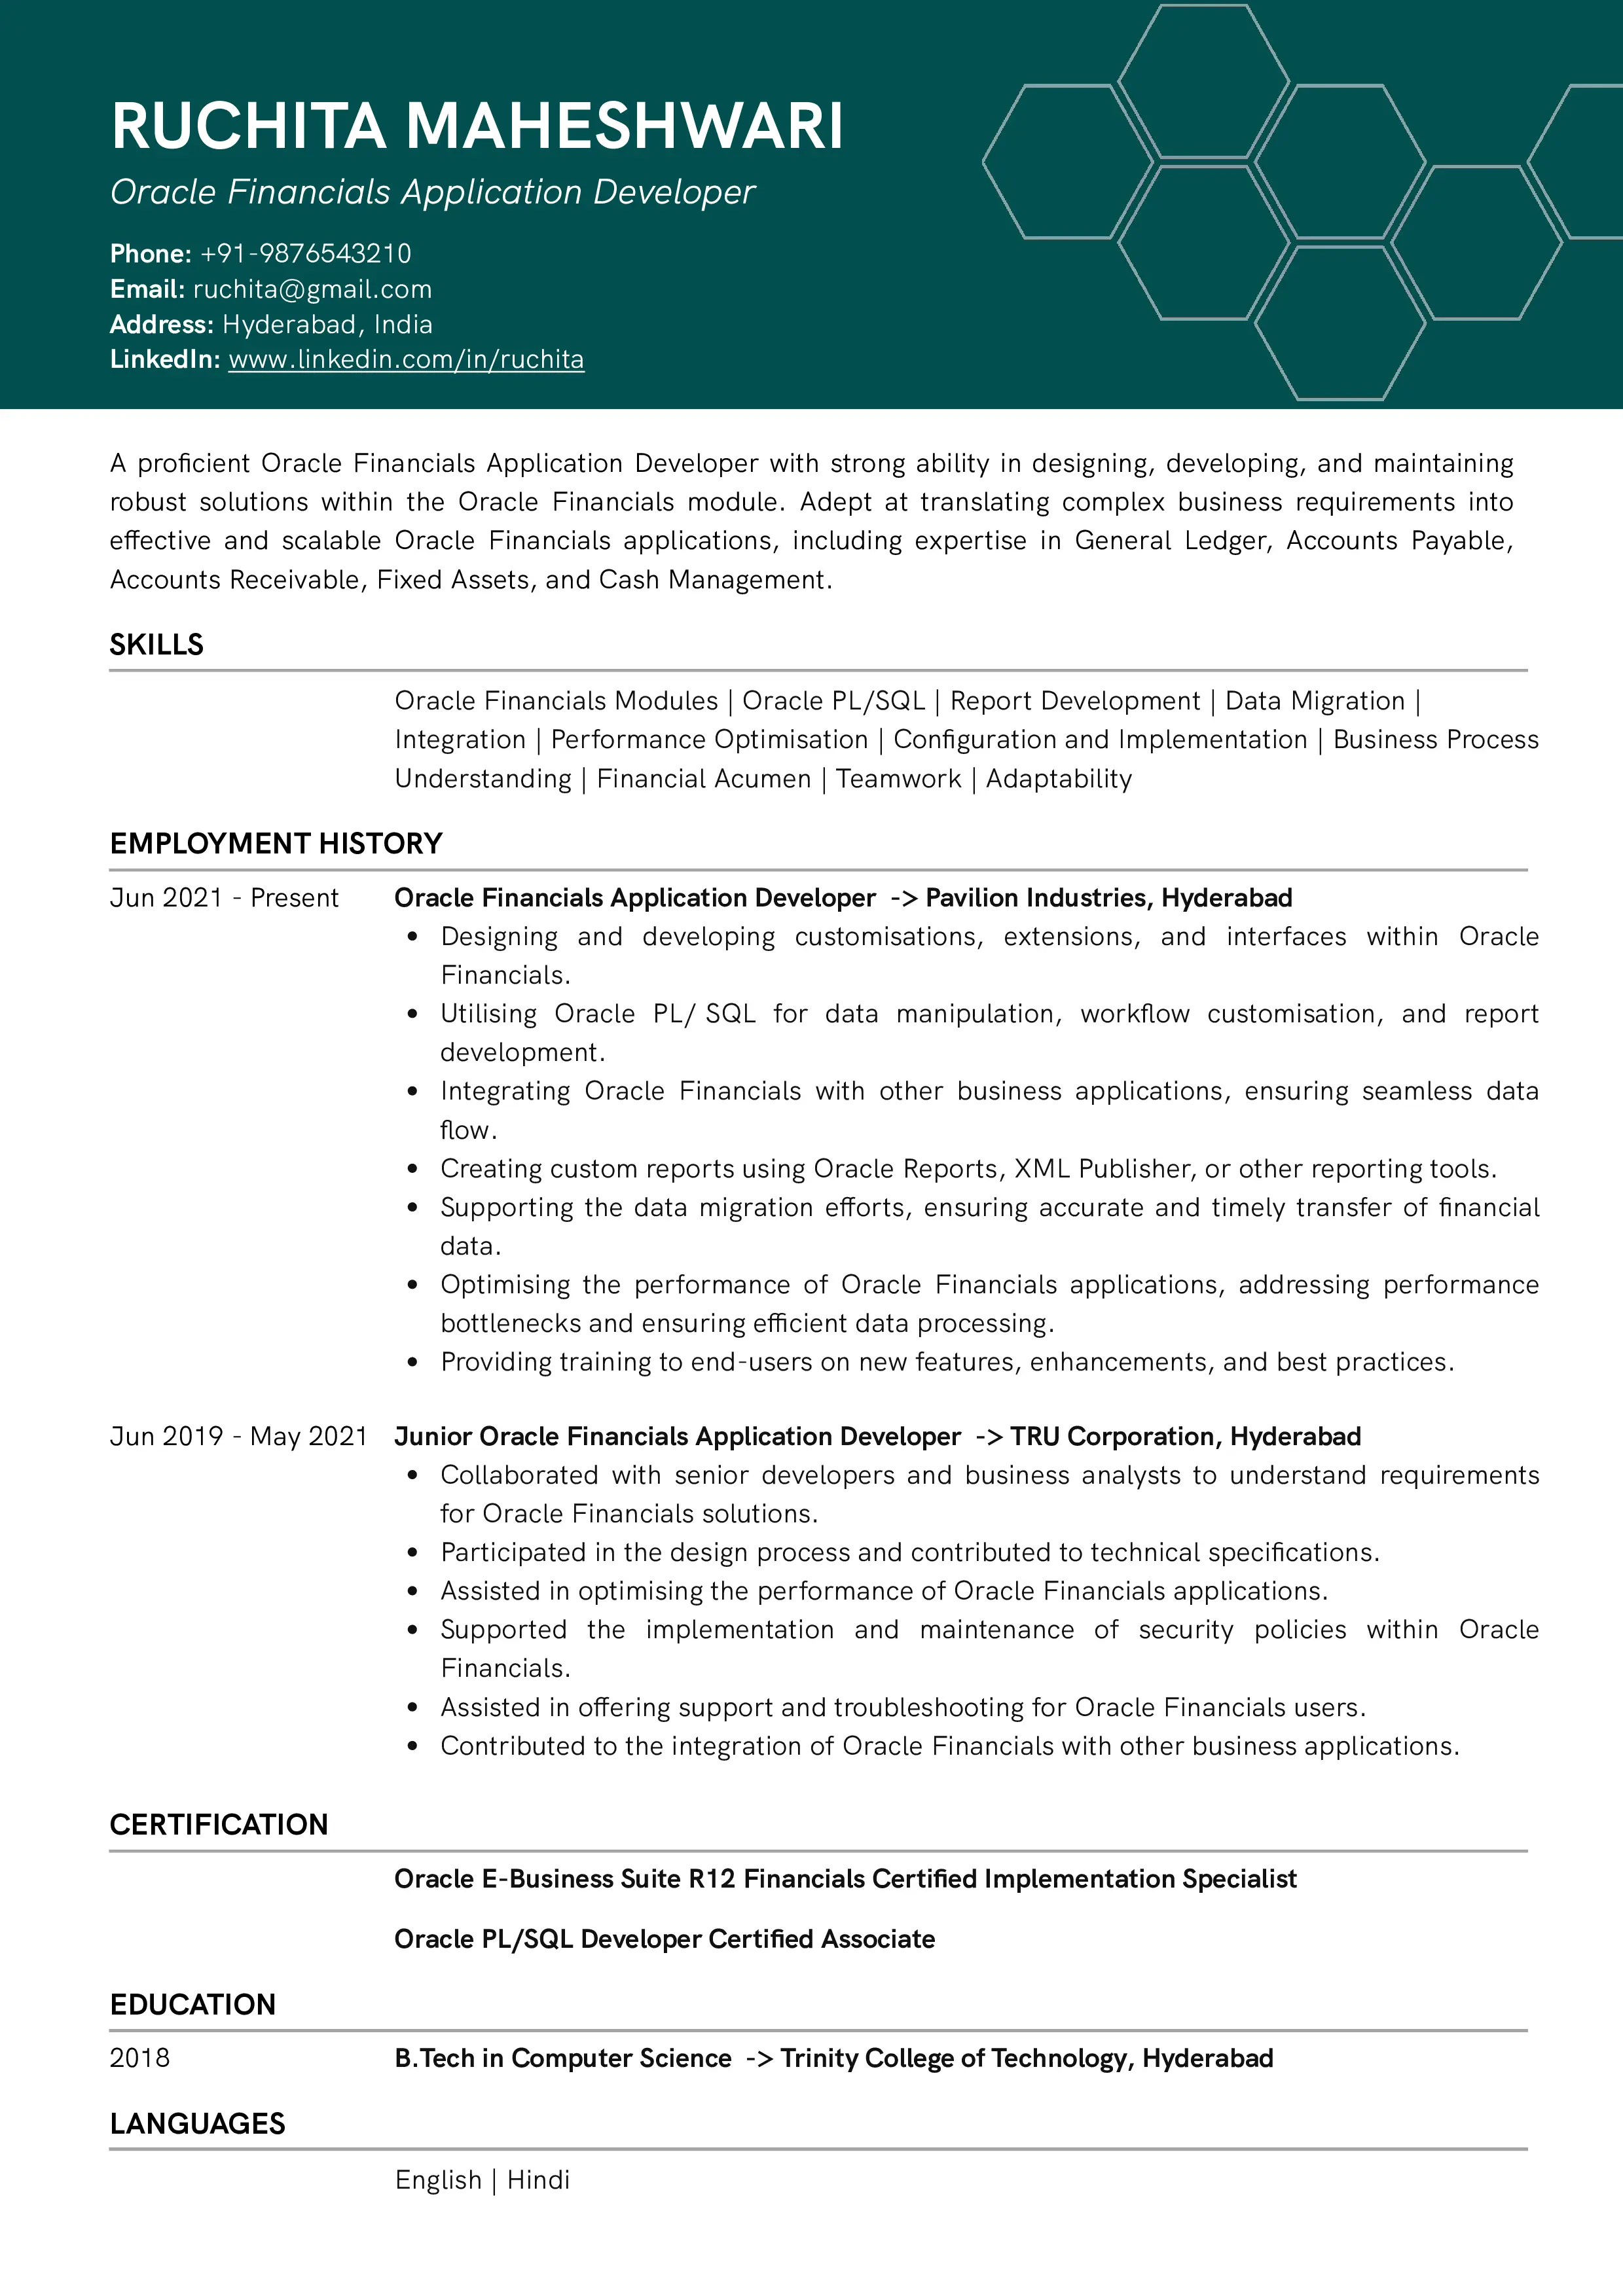 Sample Resume of Oracle Financials Application Developer | Free Resume Templates & Samples on Resumod.co